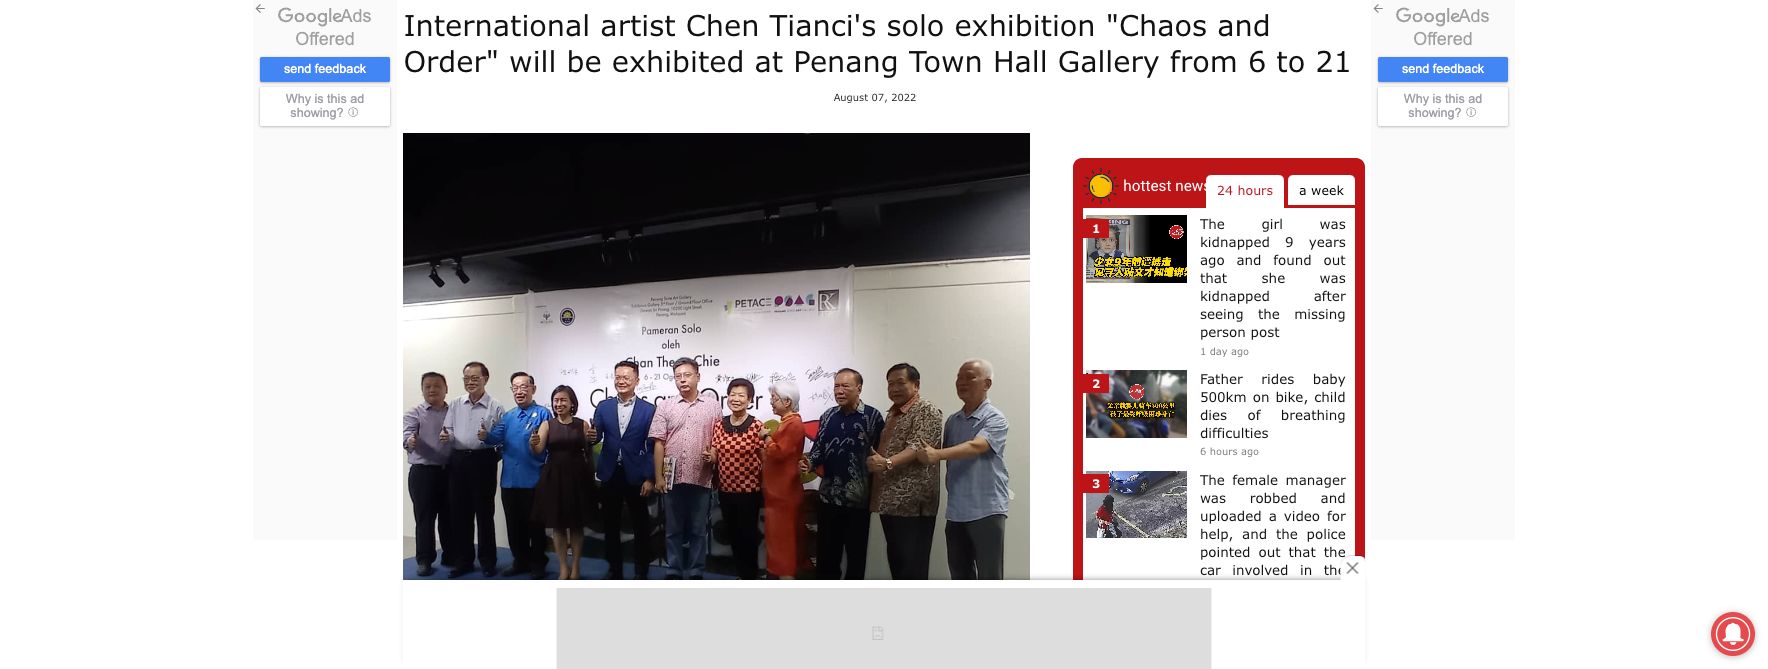 kwongwah – International artist Chen Tianci’s solo exhibition “Chaos and Order” will be exhibited at Penang Town Hall Gallery from 6 to 21 August 2022